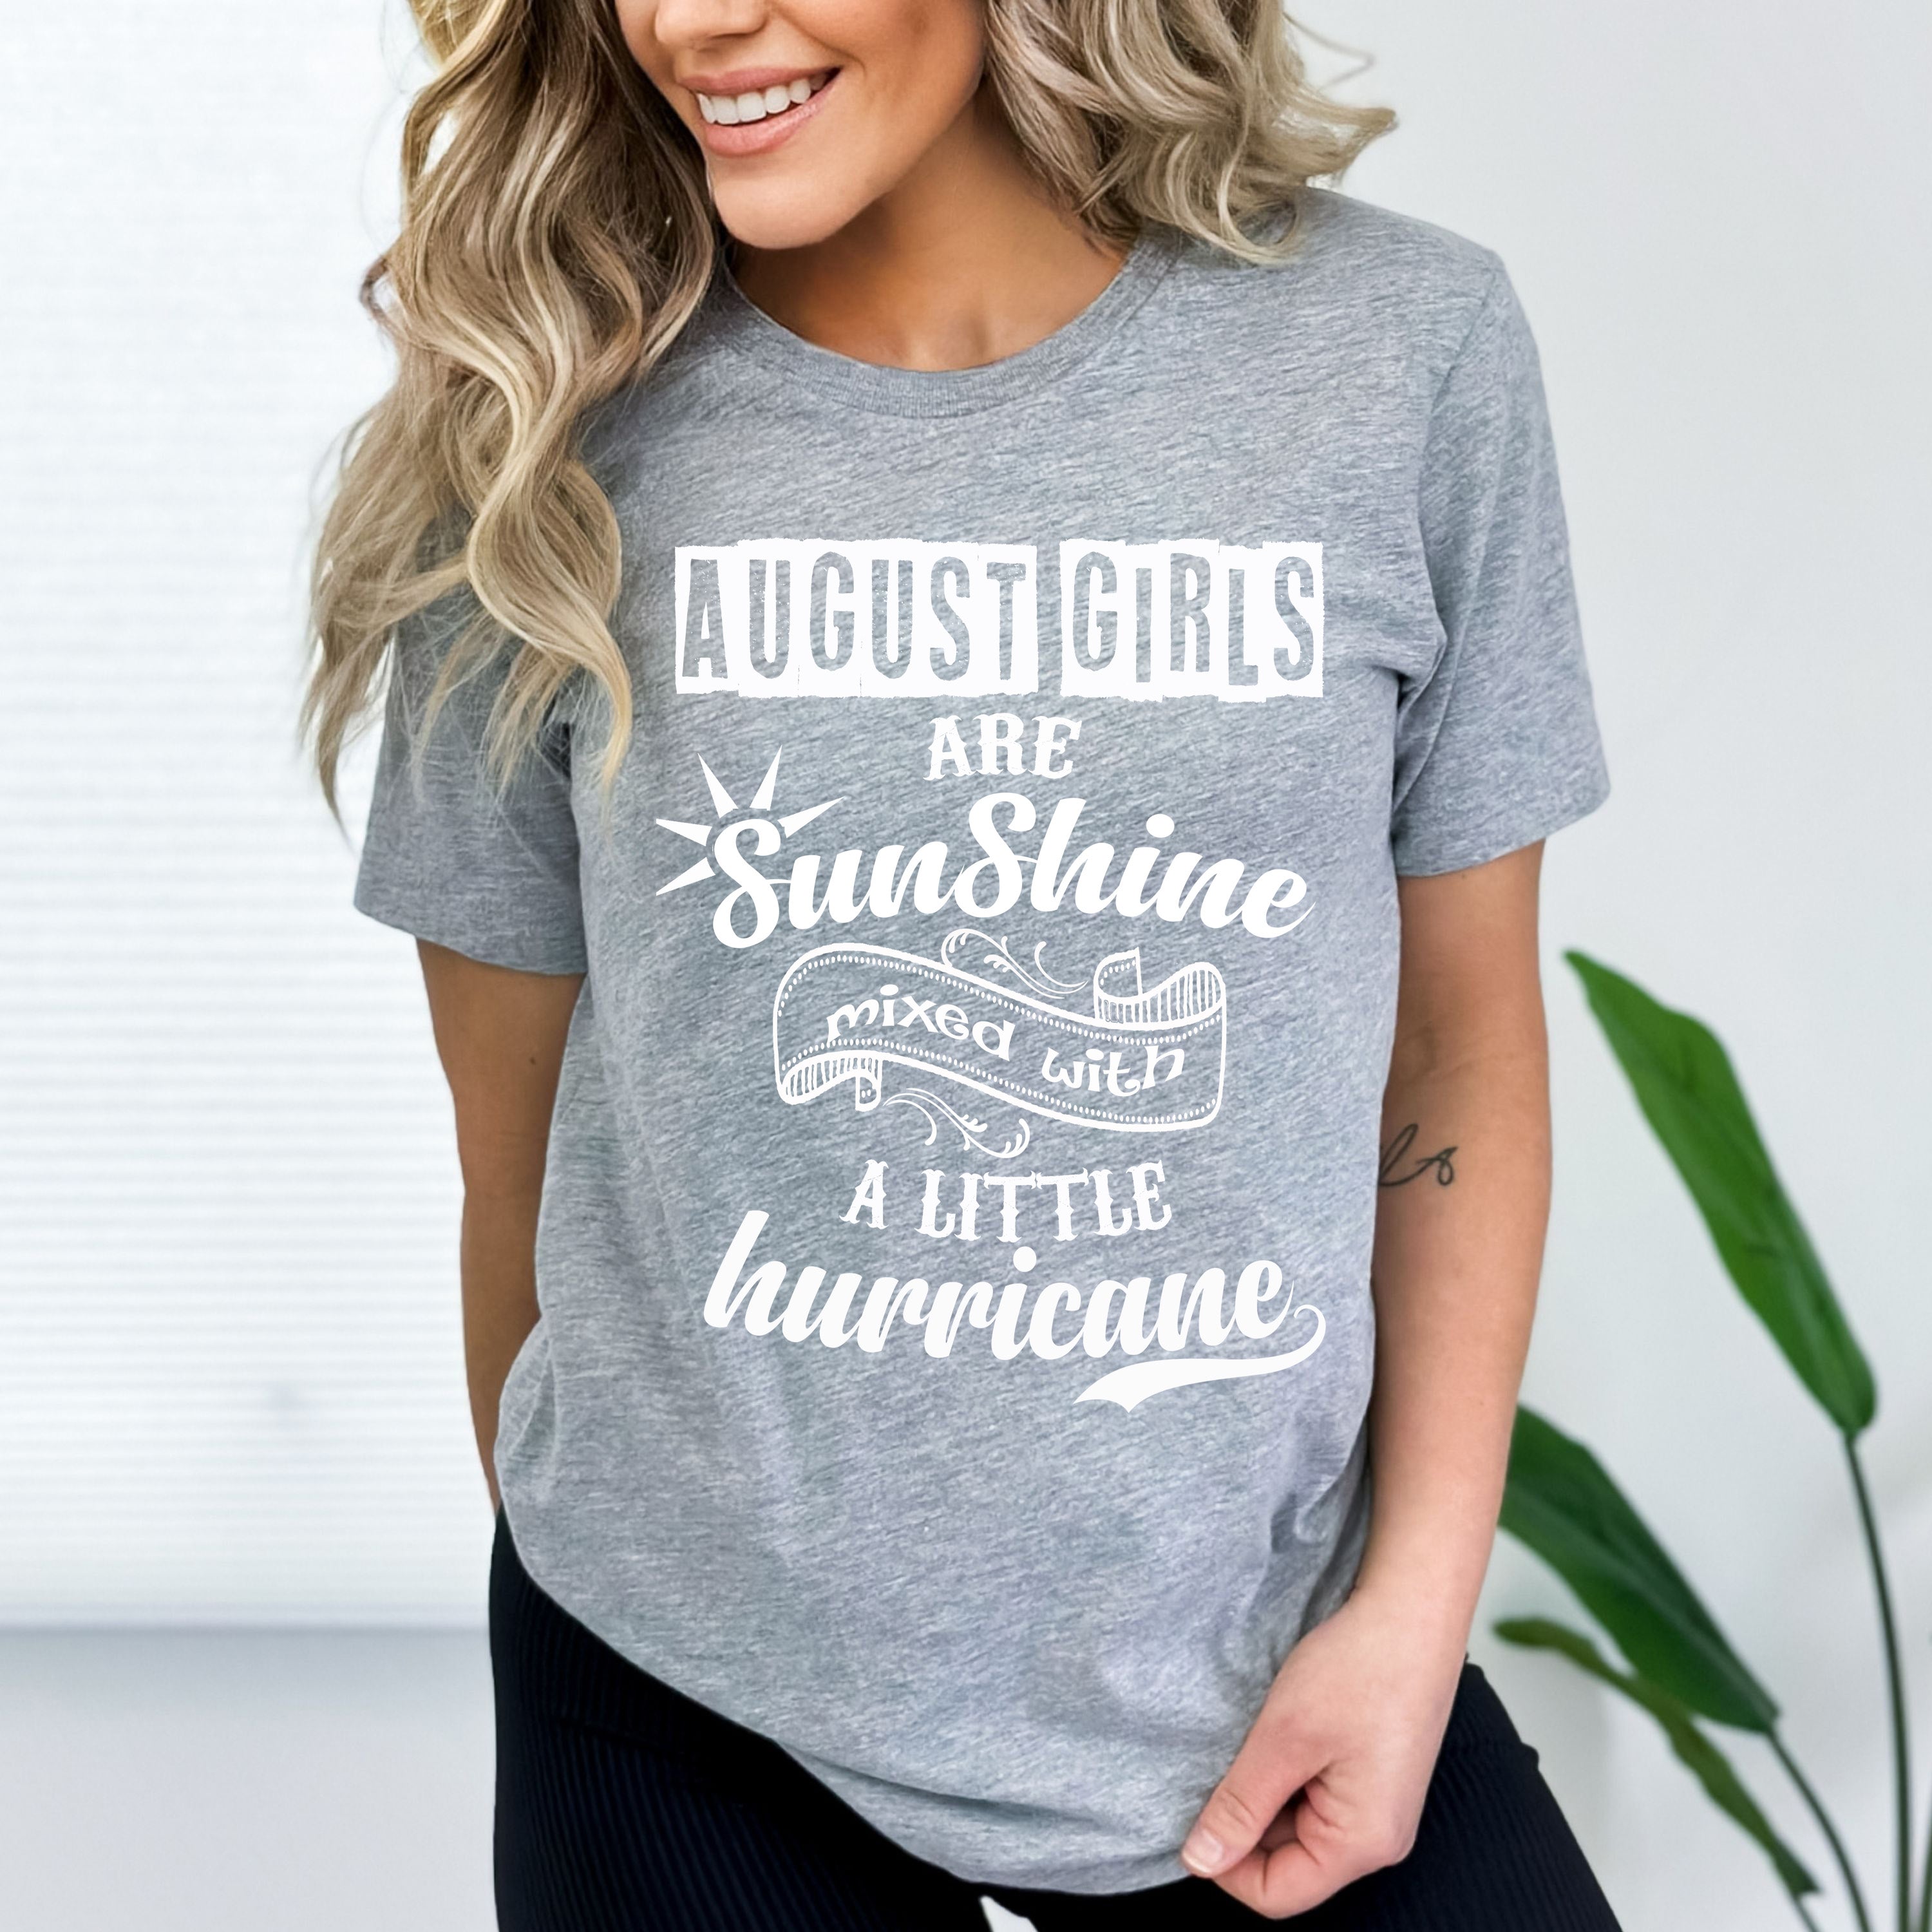 "August Girls Are Sunshine Mixed With Hurricane" Grab All Colors on This Sale.